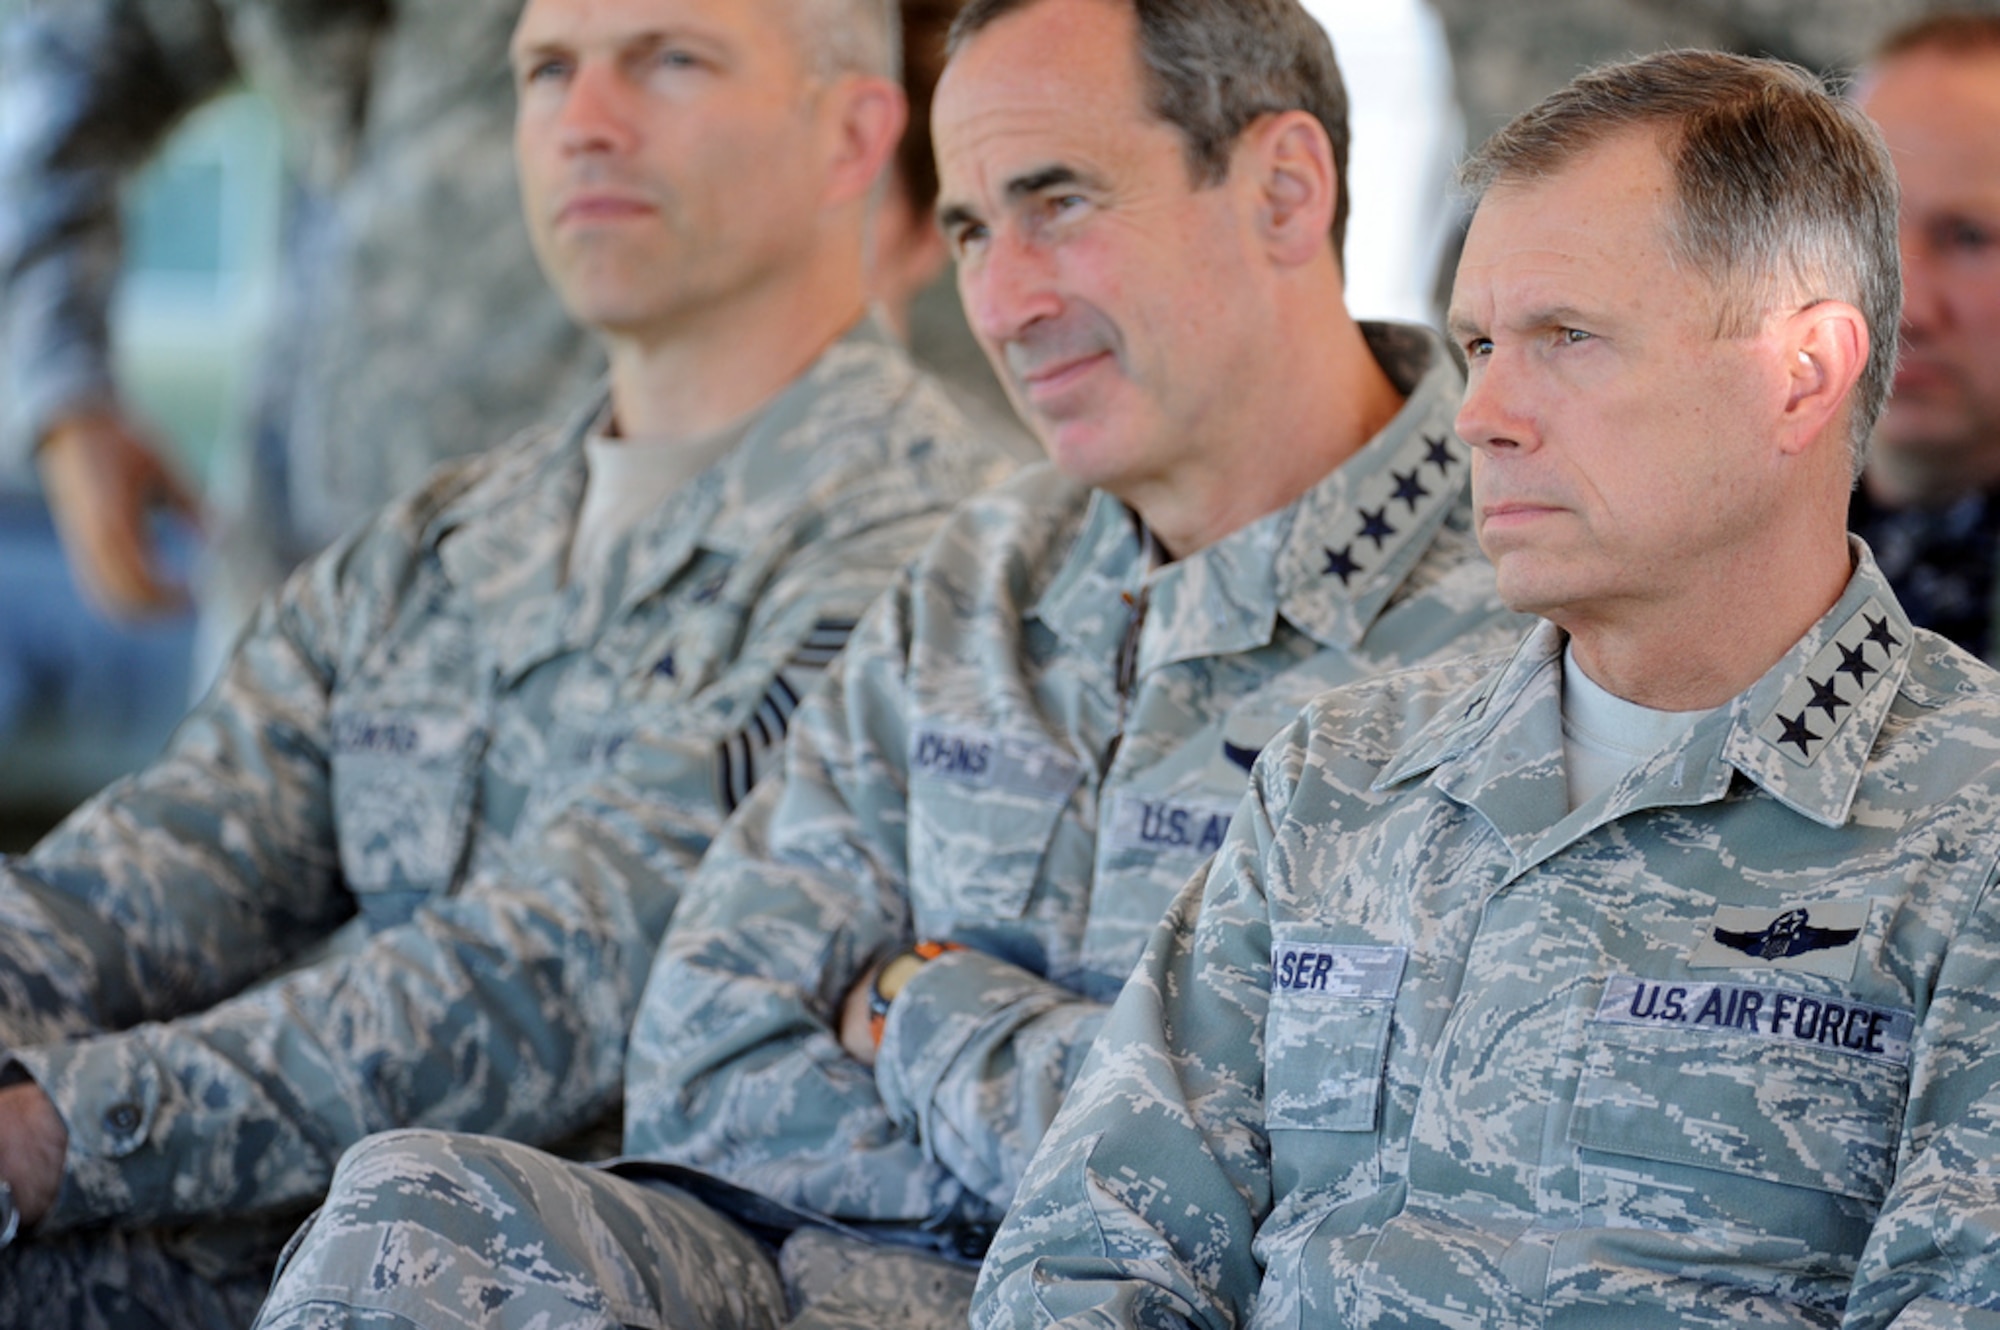 General William M. Fraser III (right), commander of U.S. Transportation Command, and Gen. Raymond E. Johns Jr. (middle), commander of Air Mobility Command, listen to a briefing before watching two C-130s release eight Joint Precision Airdrop System (JPADS) bundles during a training exercise Tuesday, April 24, at the Antelope Drop Zone at Fort Hood. The joint exercise was conducted by the Air Force's 317th Airlift Group, responsible for flying the C-130s, and the National Guard's 294th Quartermaster Company, responsible for packing, rigging and loading the bundles onto the aircraft. (Photo by Daniel Cernero, III Corps and Fort Hood Public Affairs)